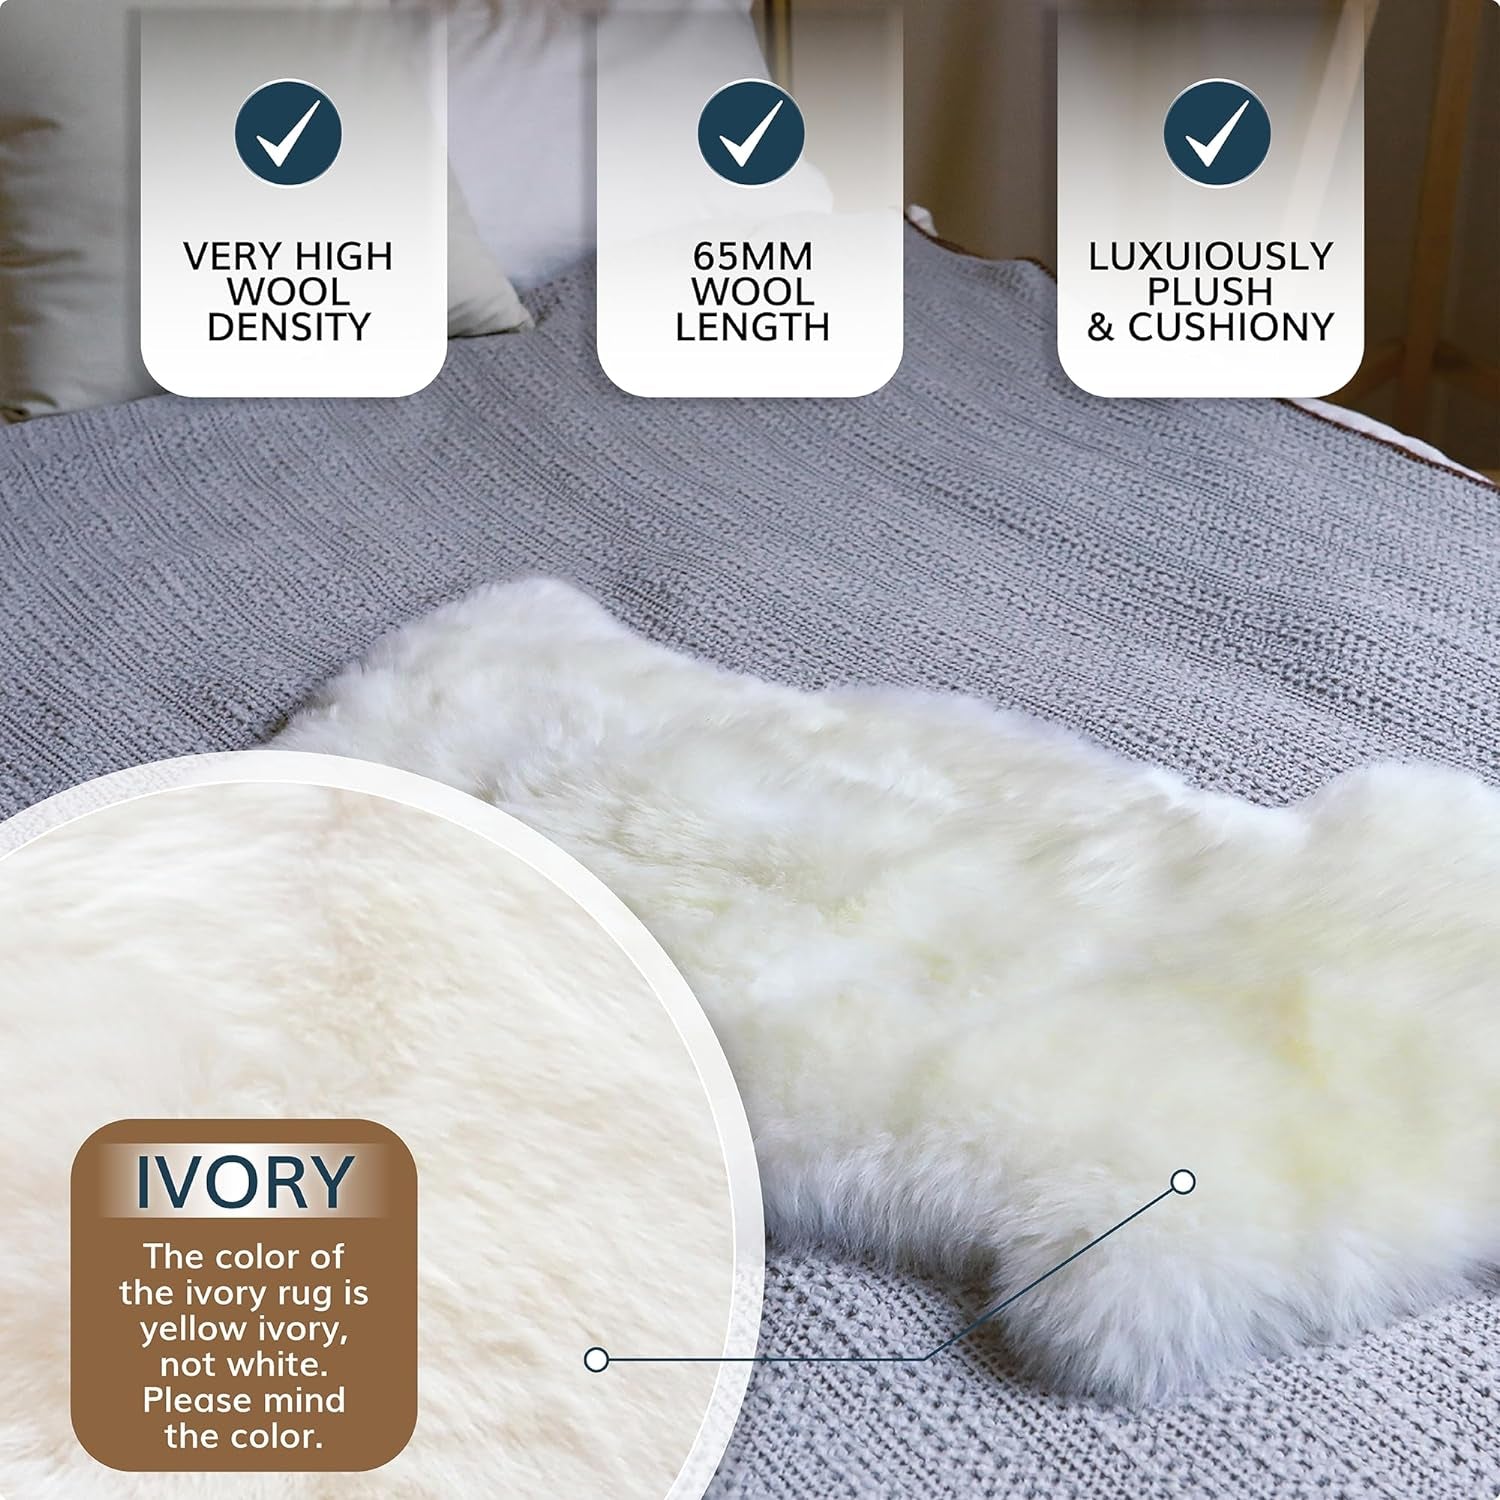 Authentic New Zealand Sheepskin Area Rug, Versatile Fluffy Wool Cover in Multiple Sizes, Perfect for Bedrooms, Living Rooms, Chair Covers, or Motorcycle Seats